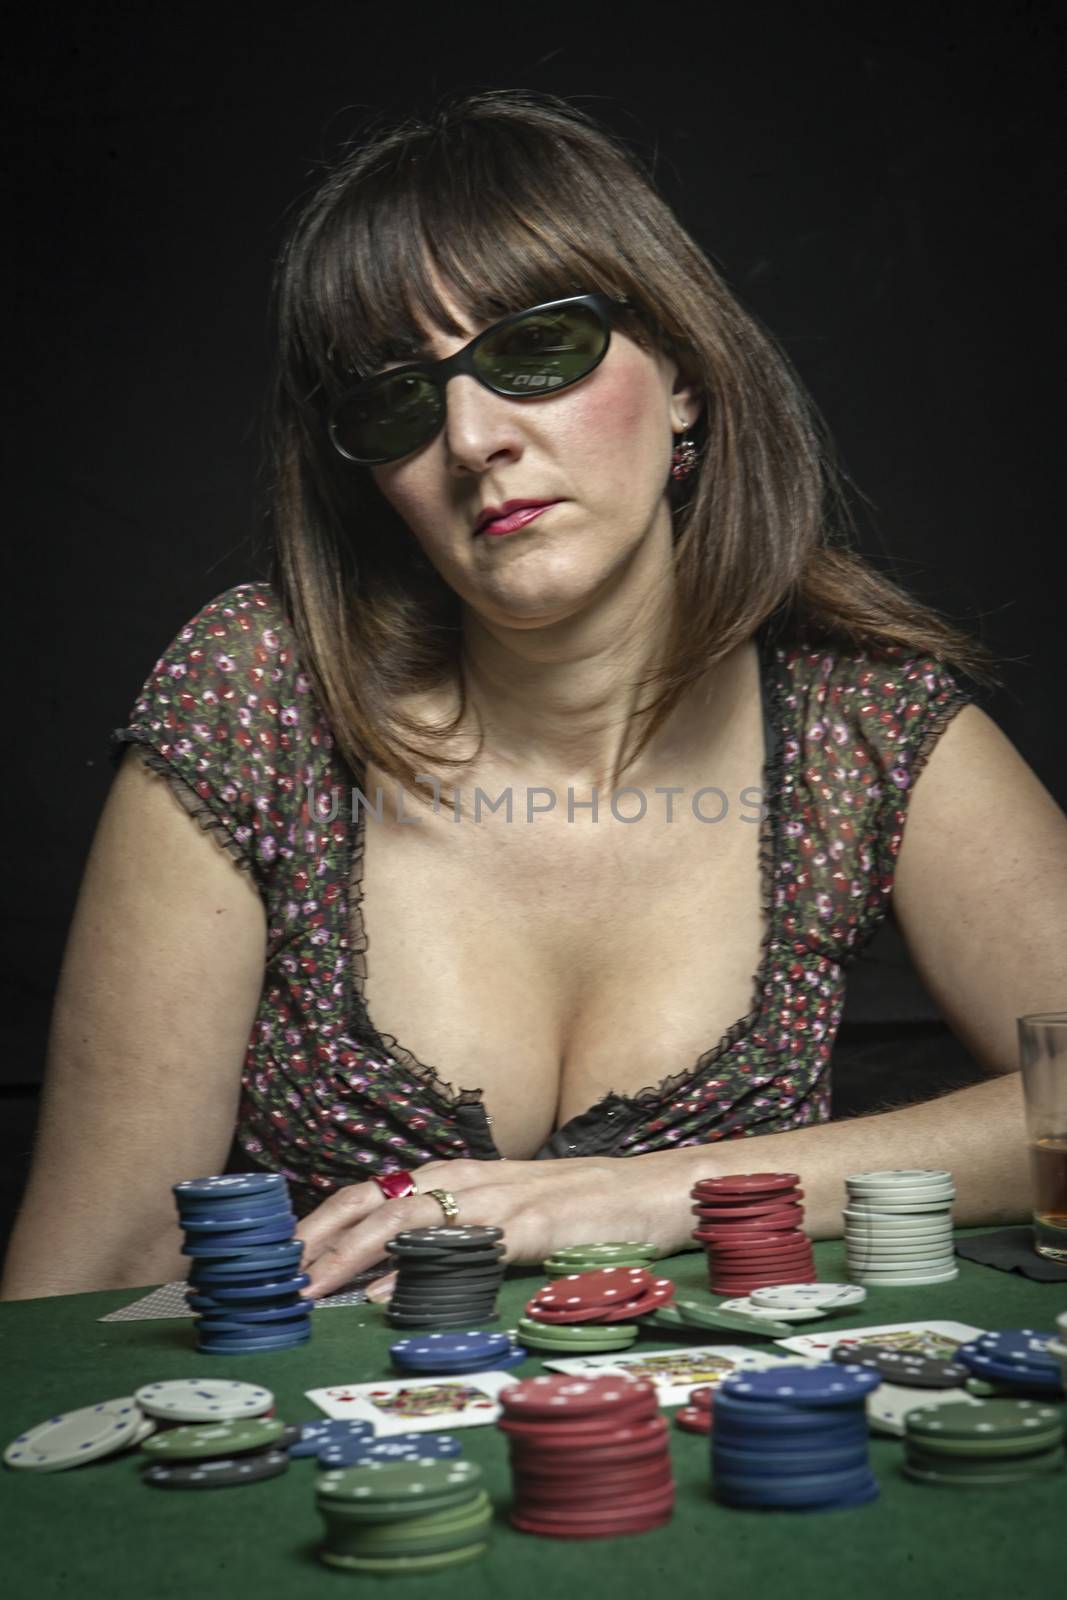 Attractive woman subject his sunglasses while playing a game of poker